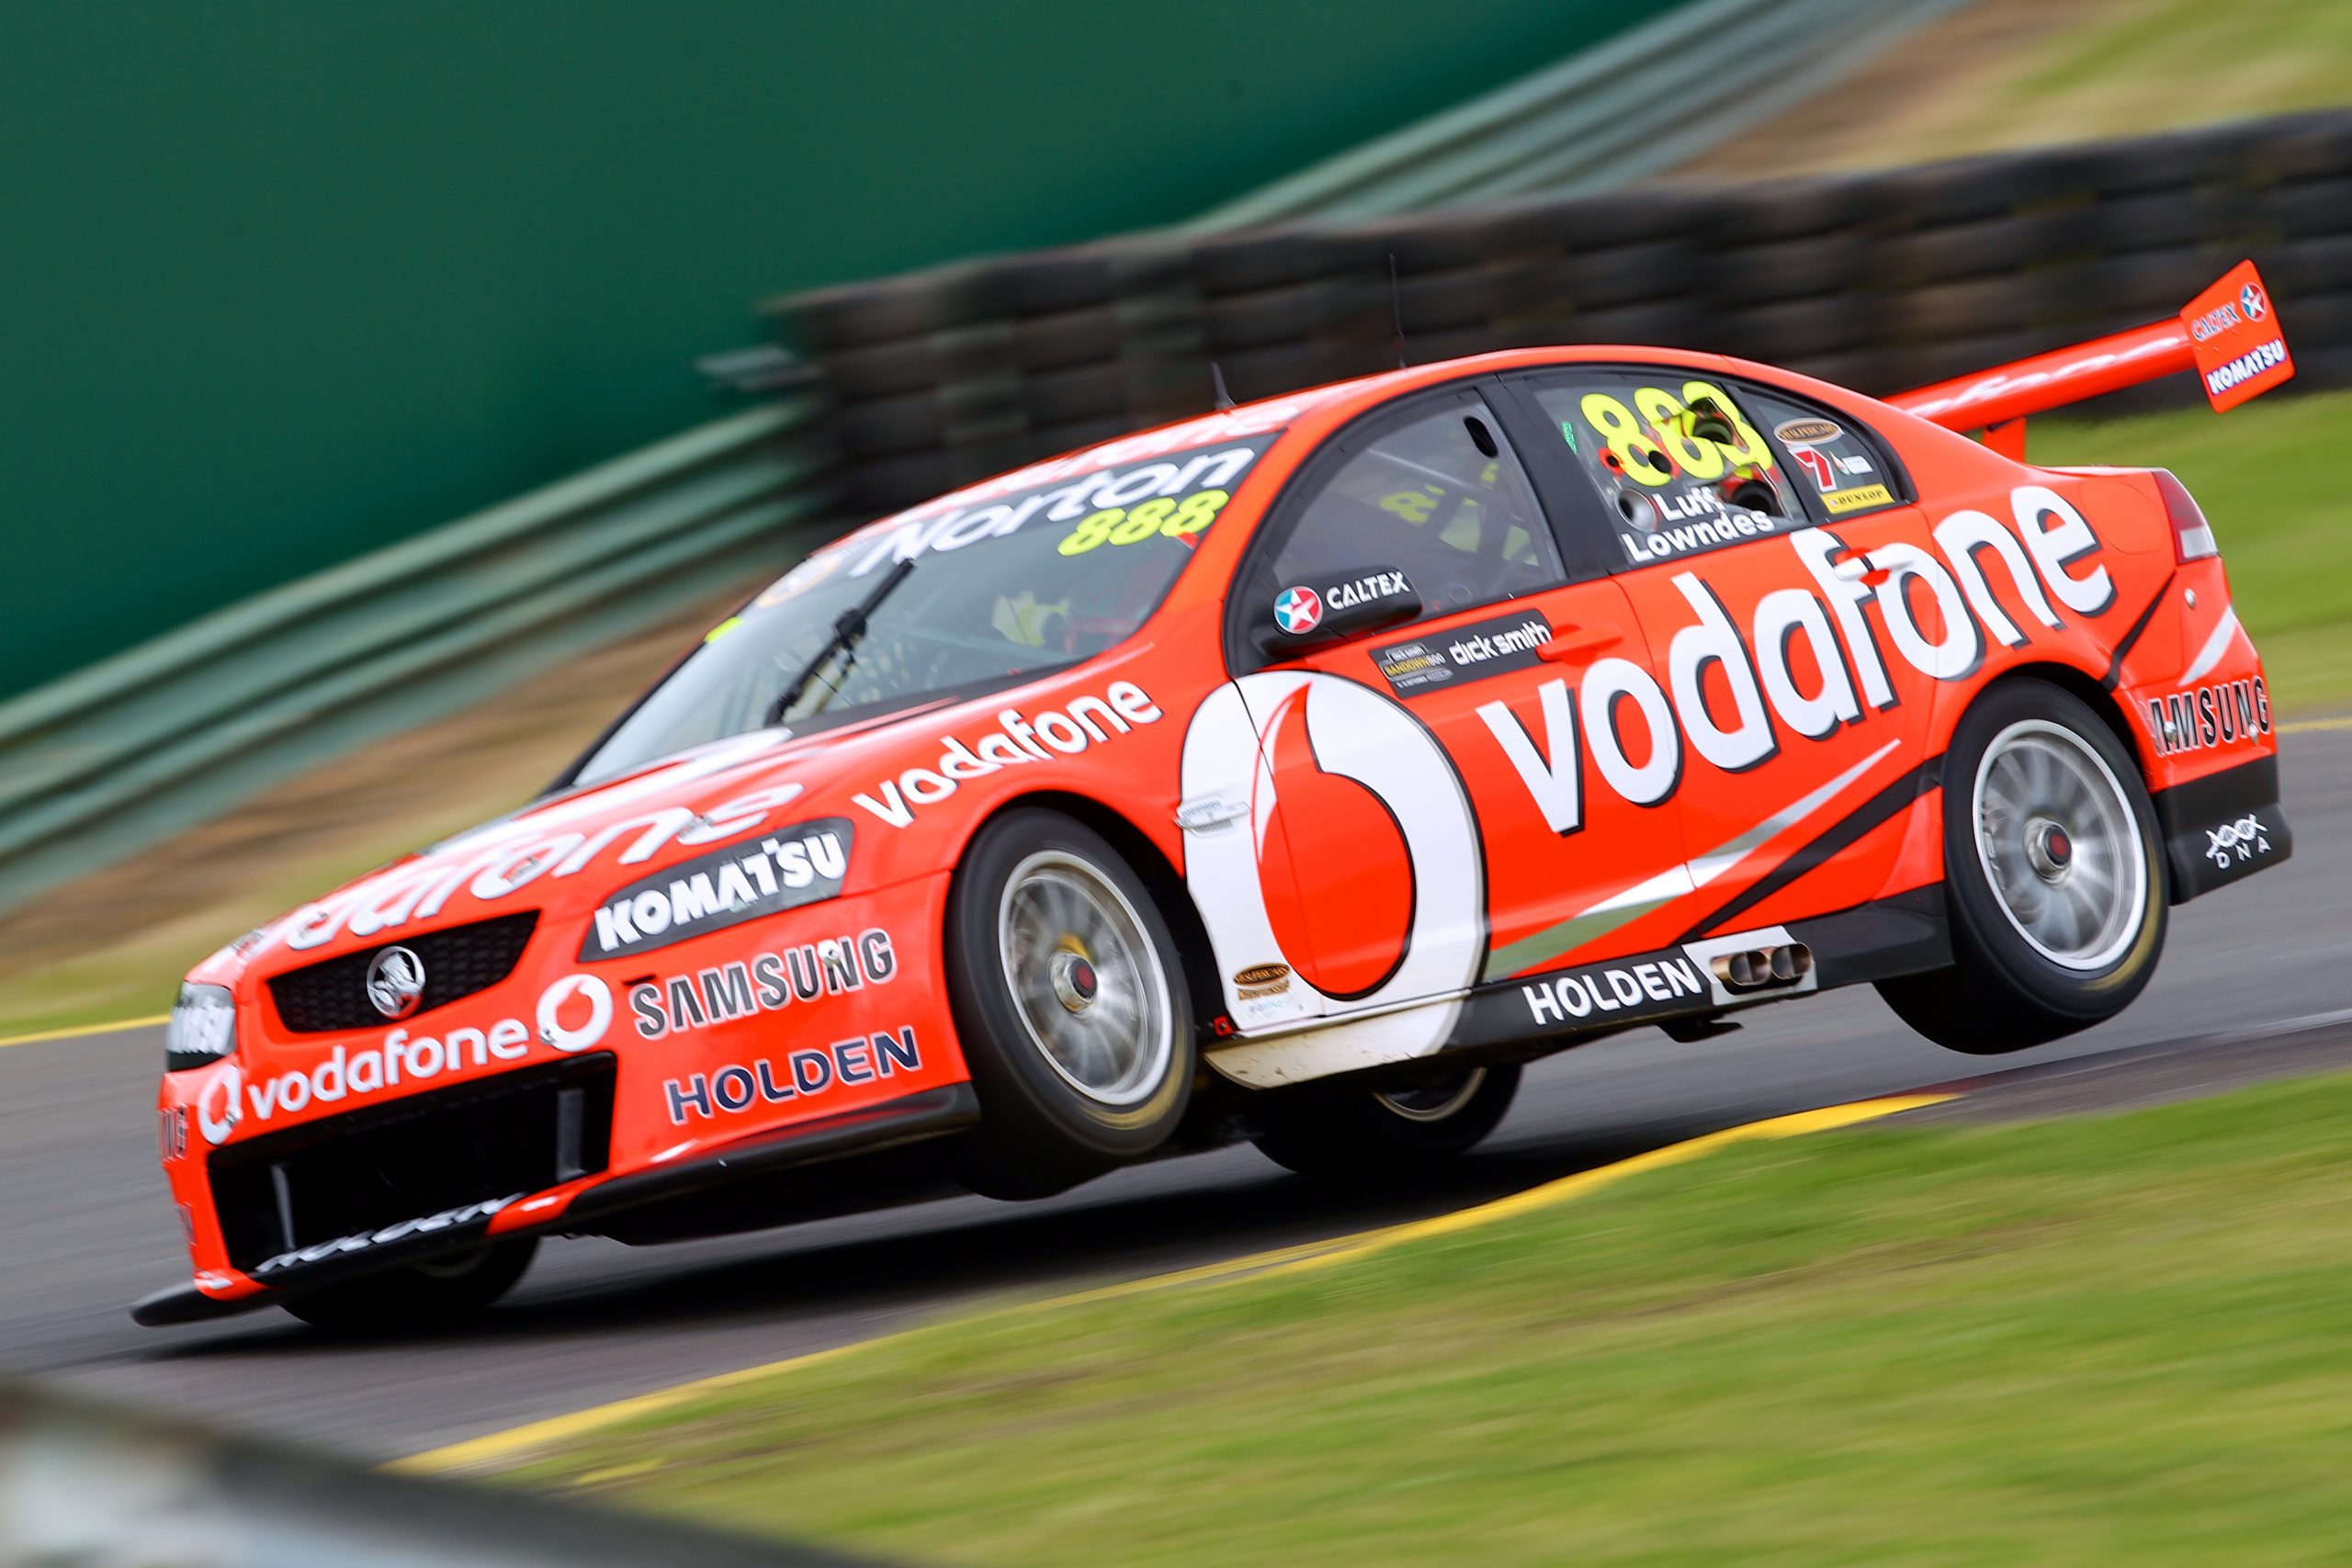 Craig Lowndes' Holden VE Commodore as it raced in 2012.